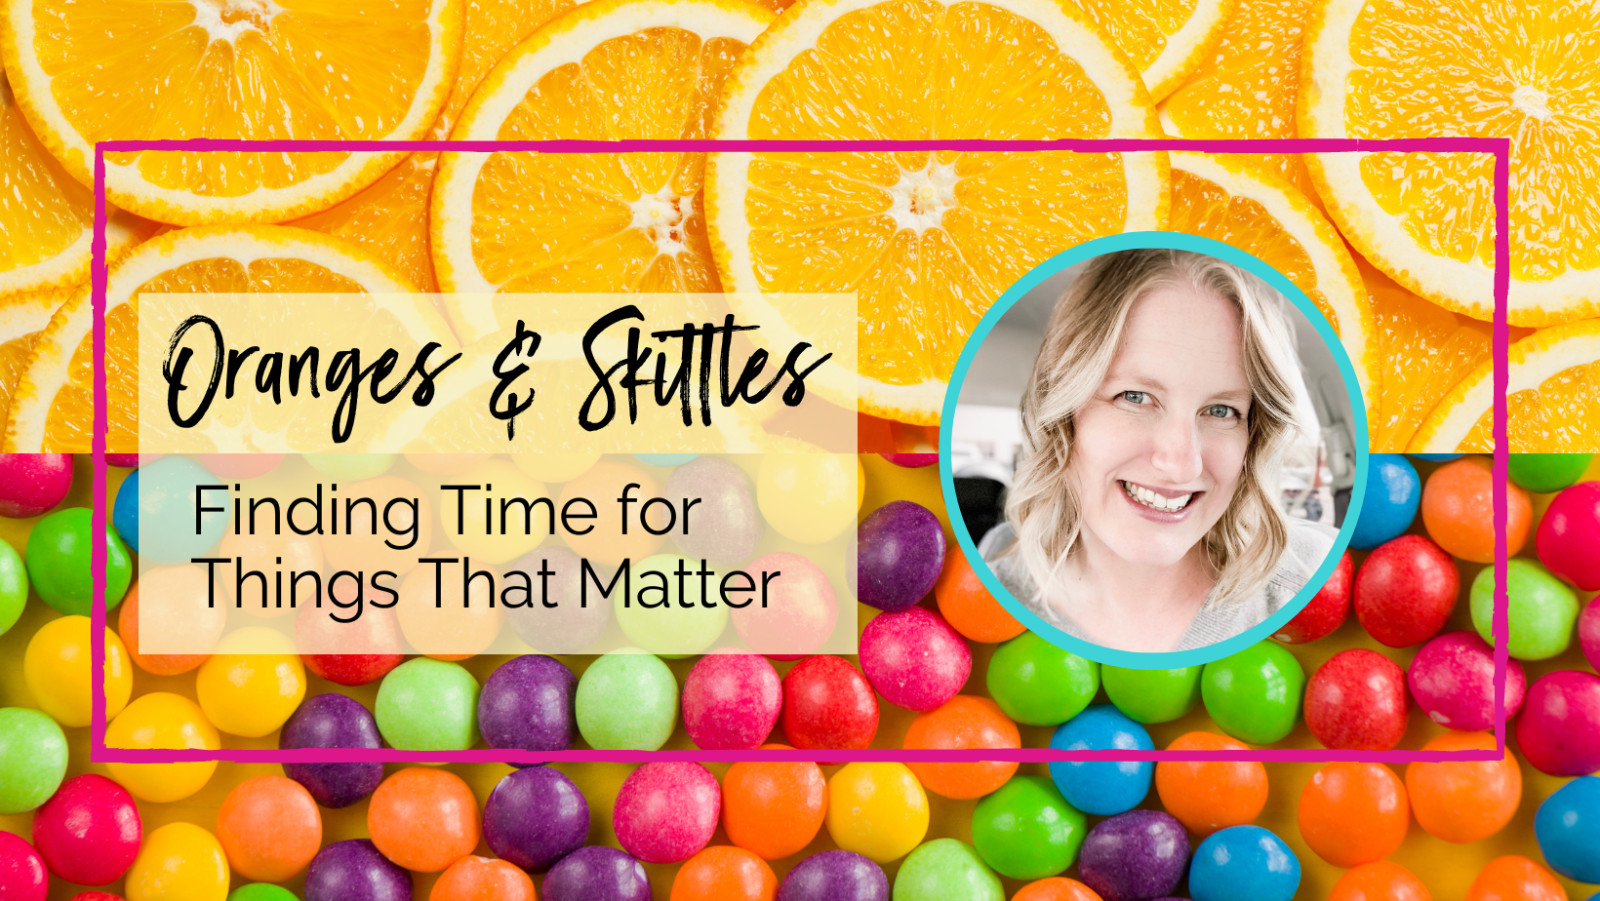 Oranges & Skittles: Finding Time For Things That Matter